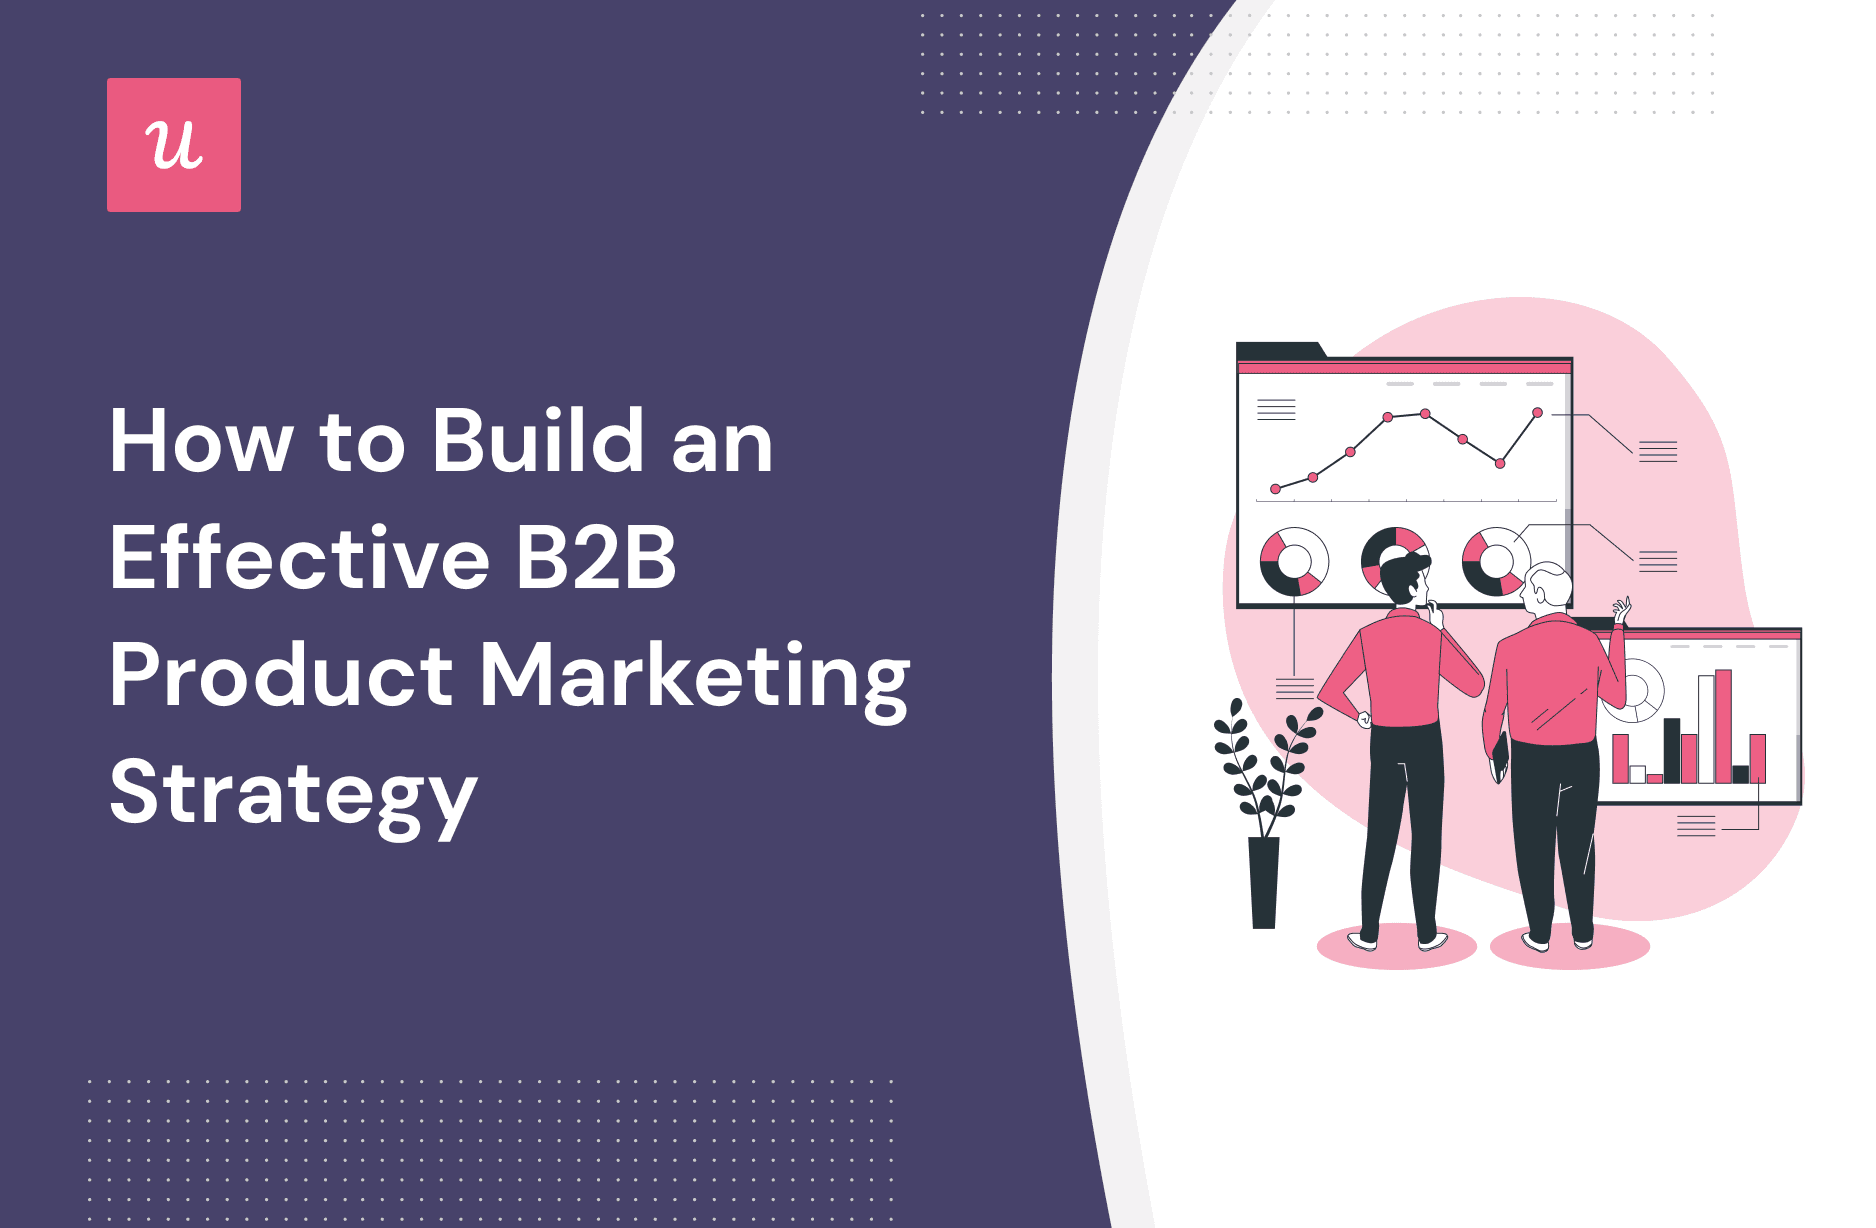 How to Build an Effective B2B Product Marketing Strategy cover